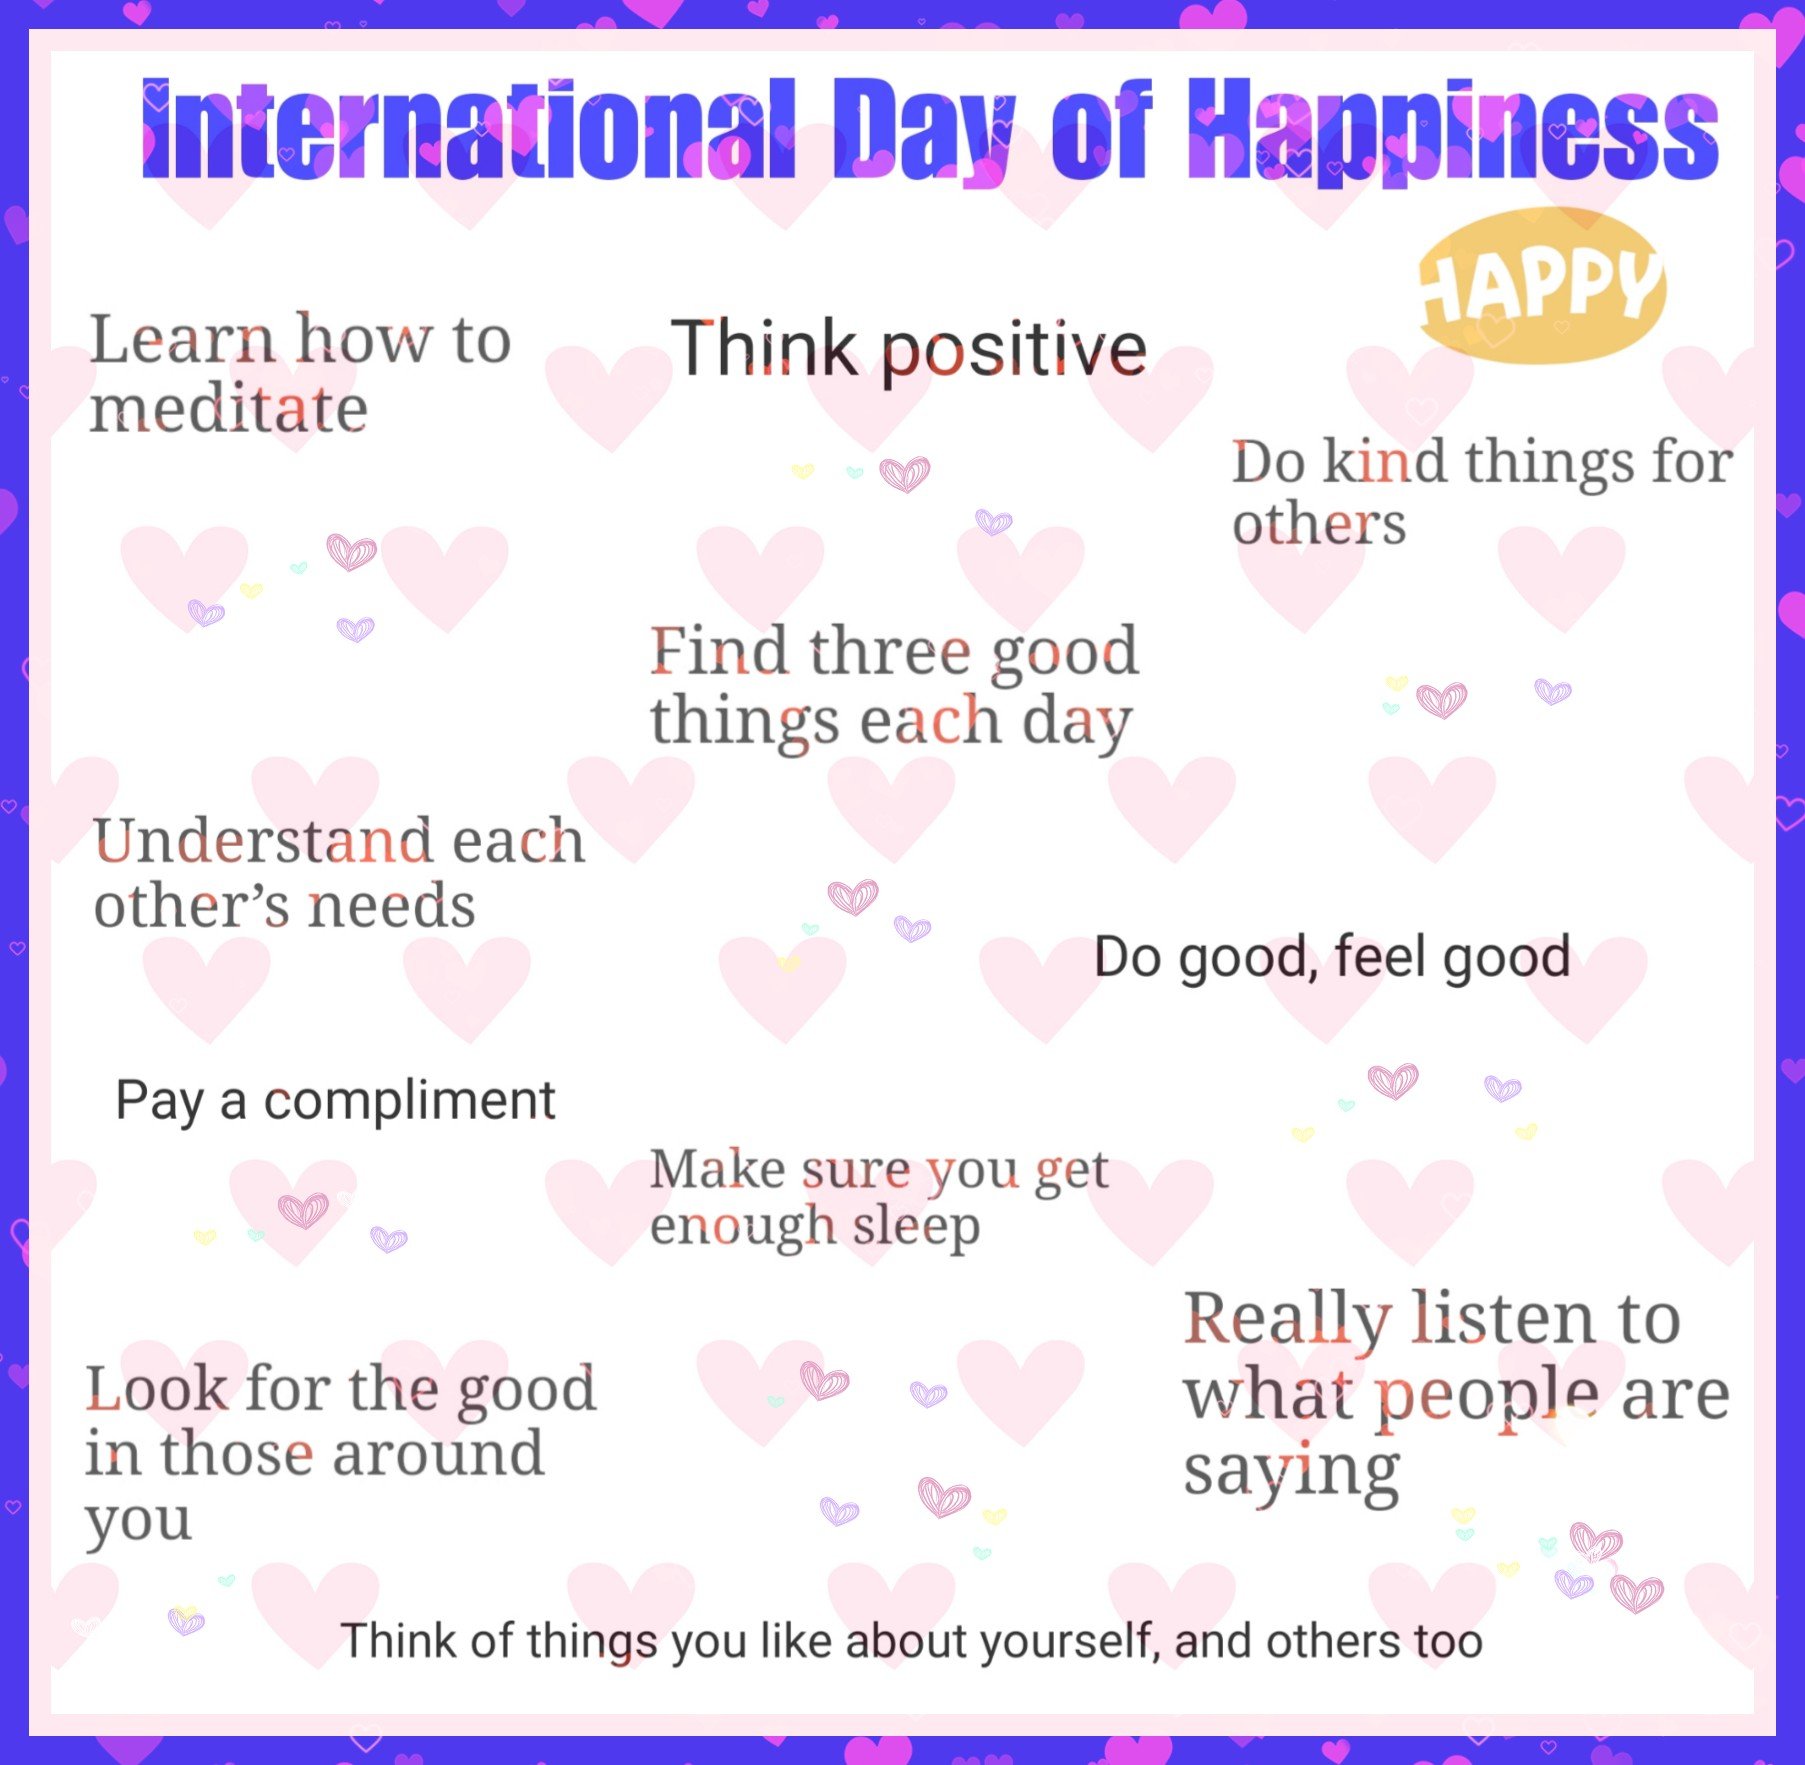 International Day of Happiness infographic